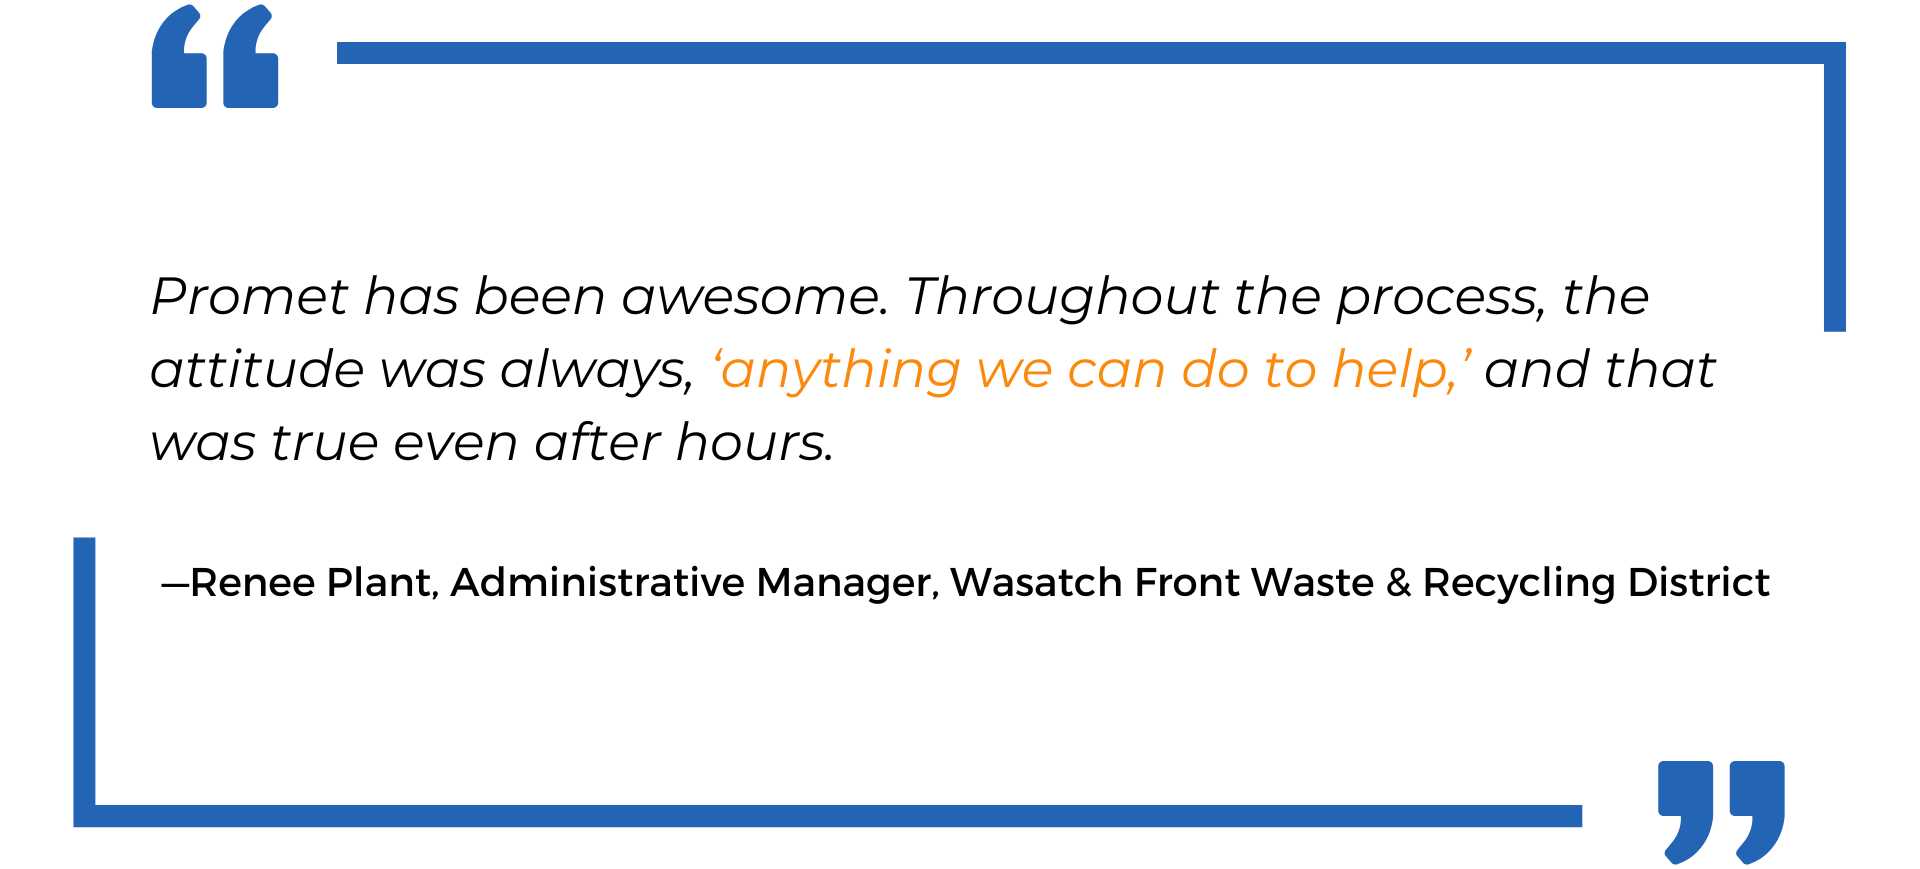 Promet has been awesome. - Wasatch Front Waste & Recycling District